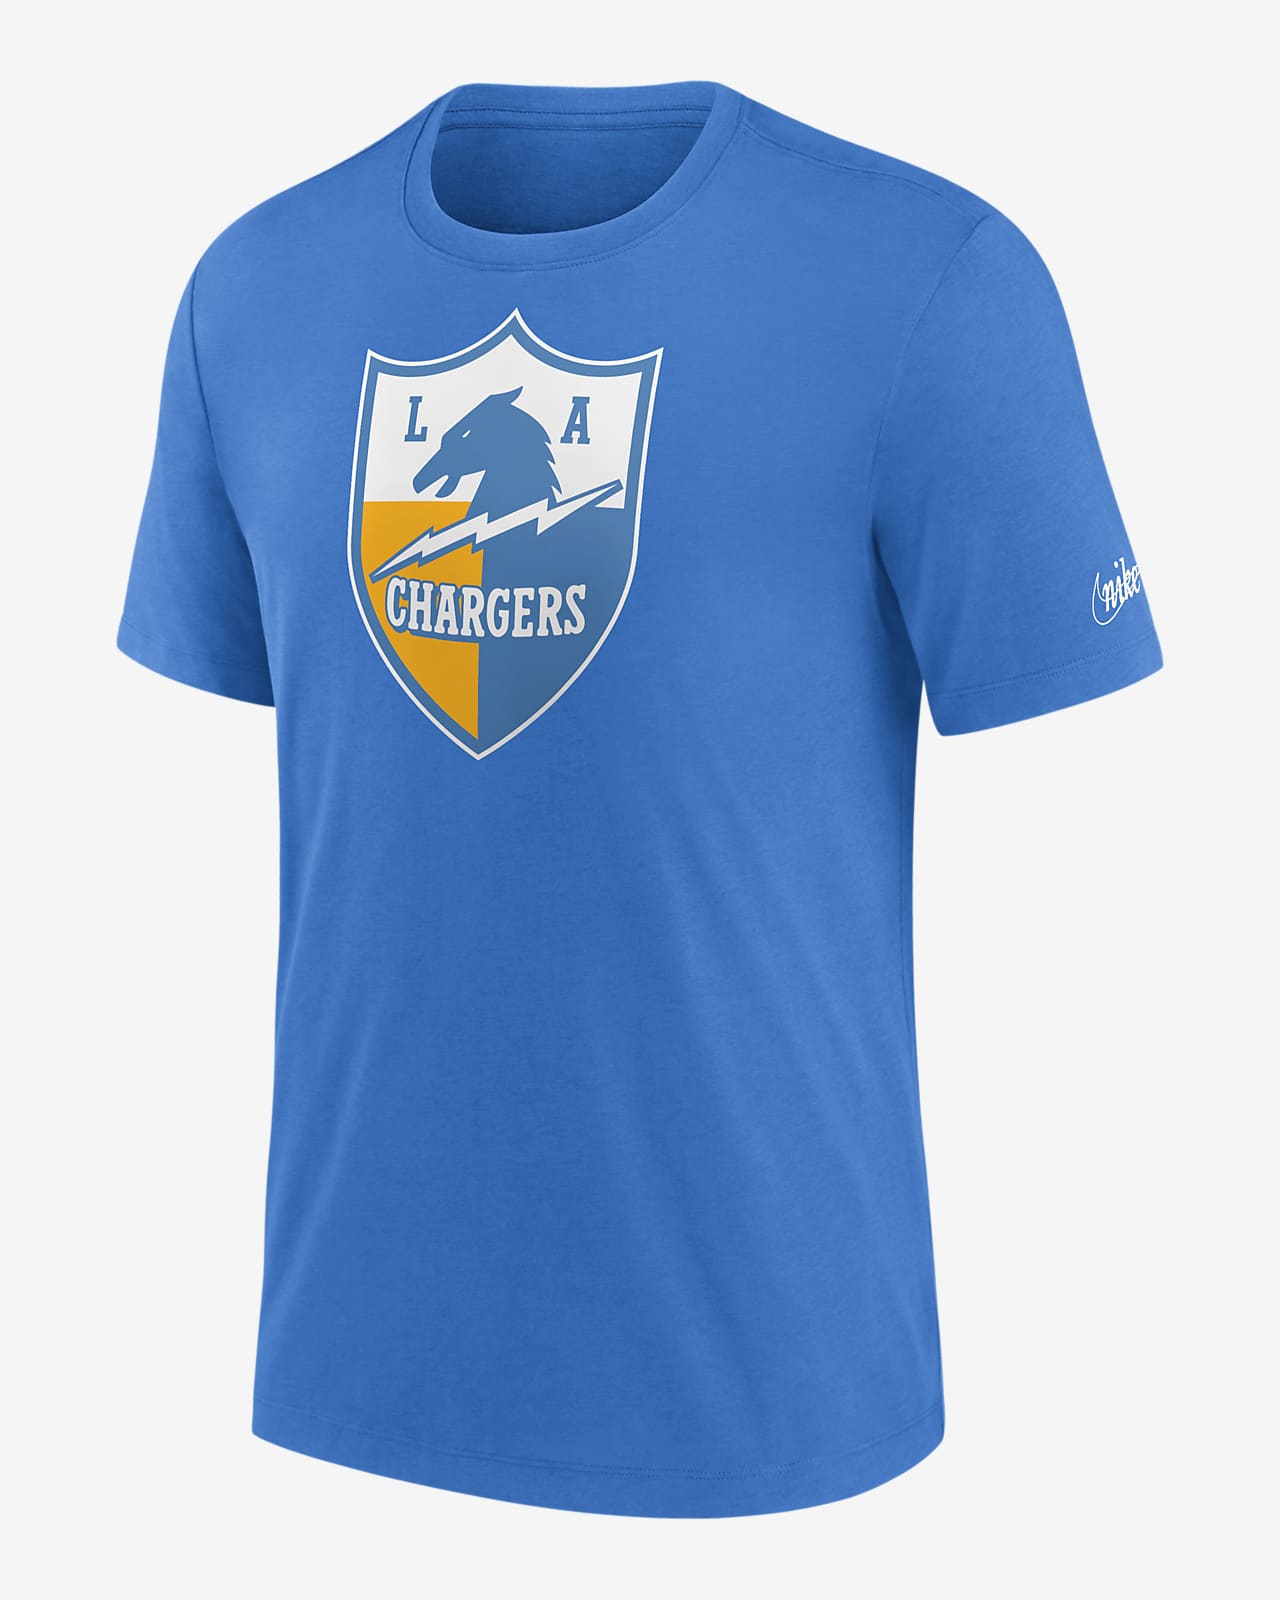 chargers retro shirt